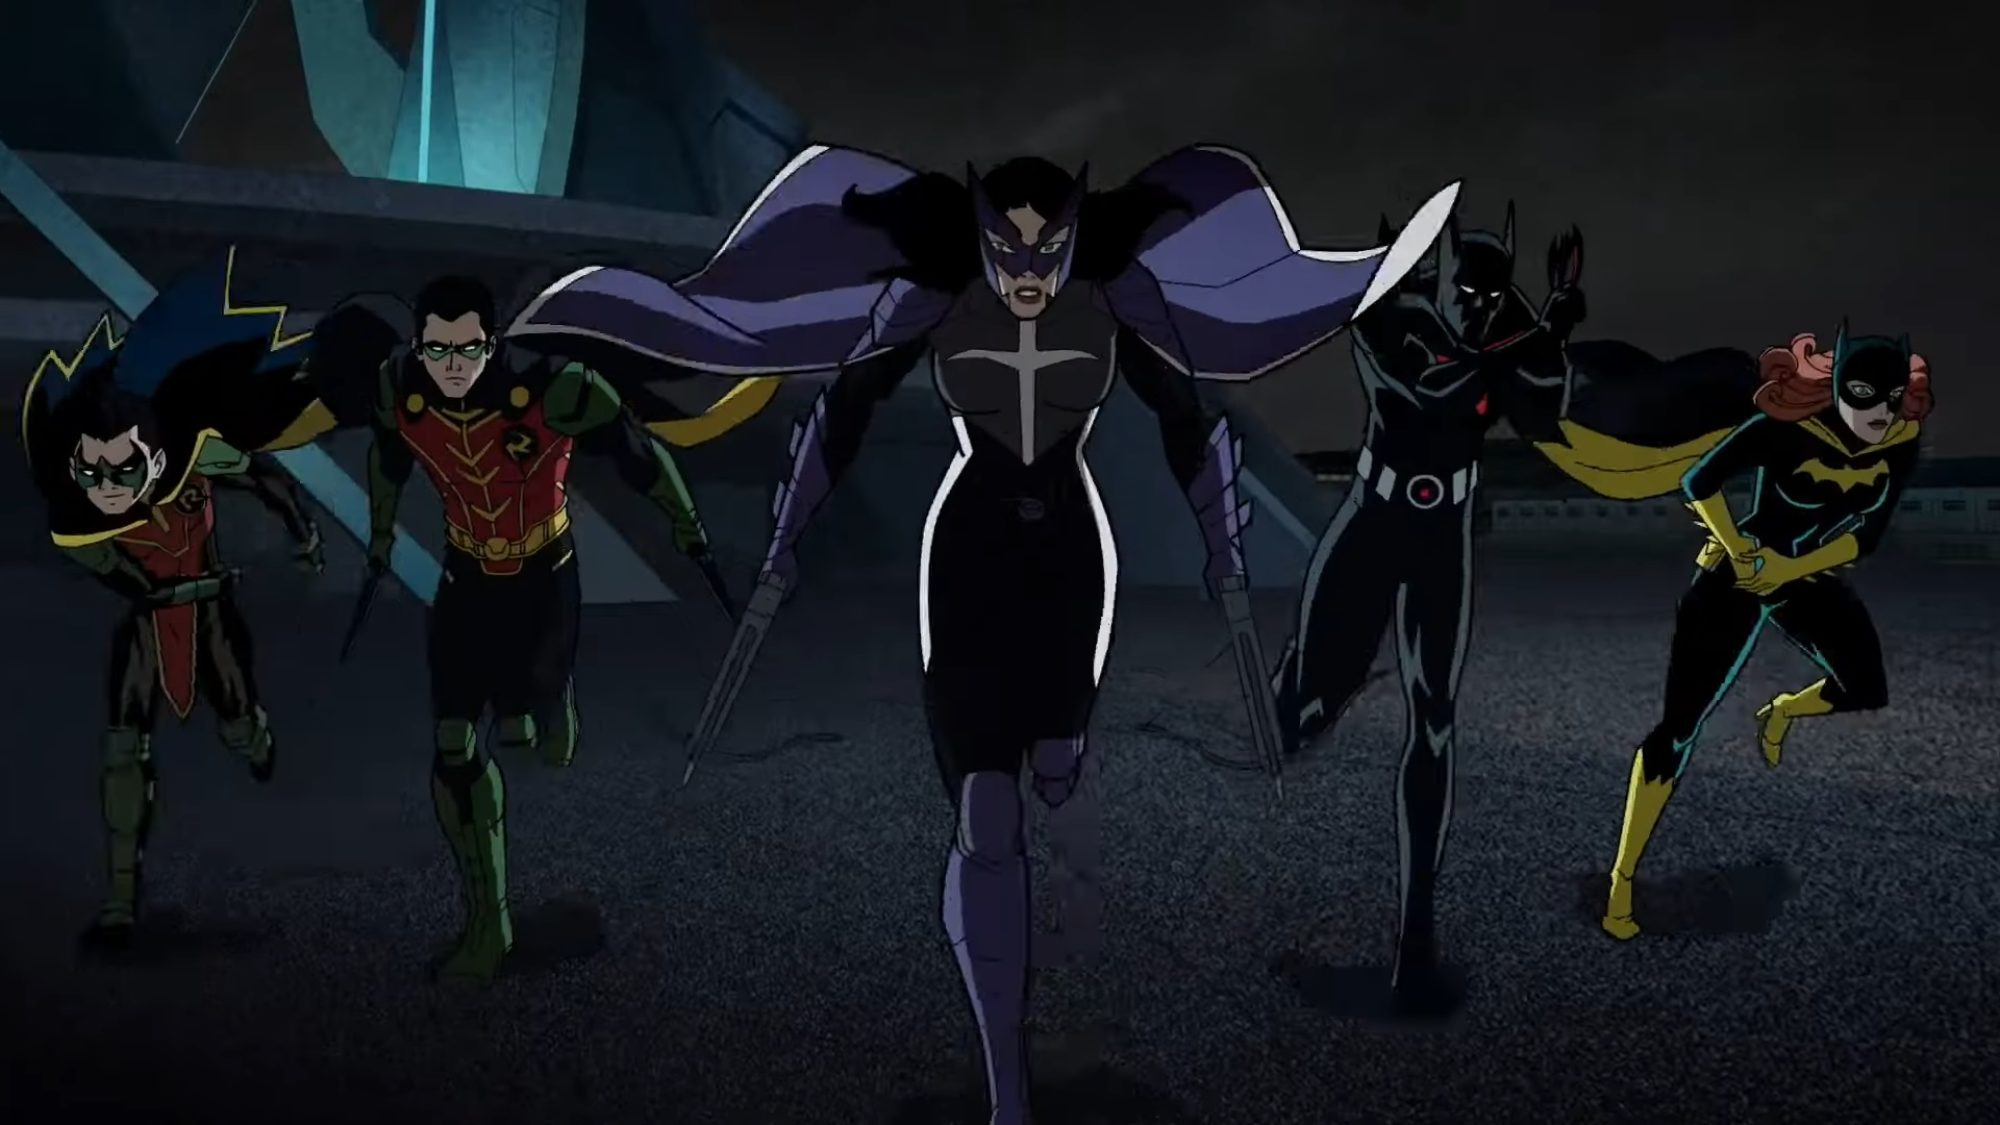 DC is bringing back Justice League Unlimited for a limited series